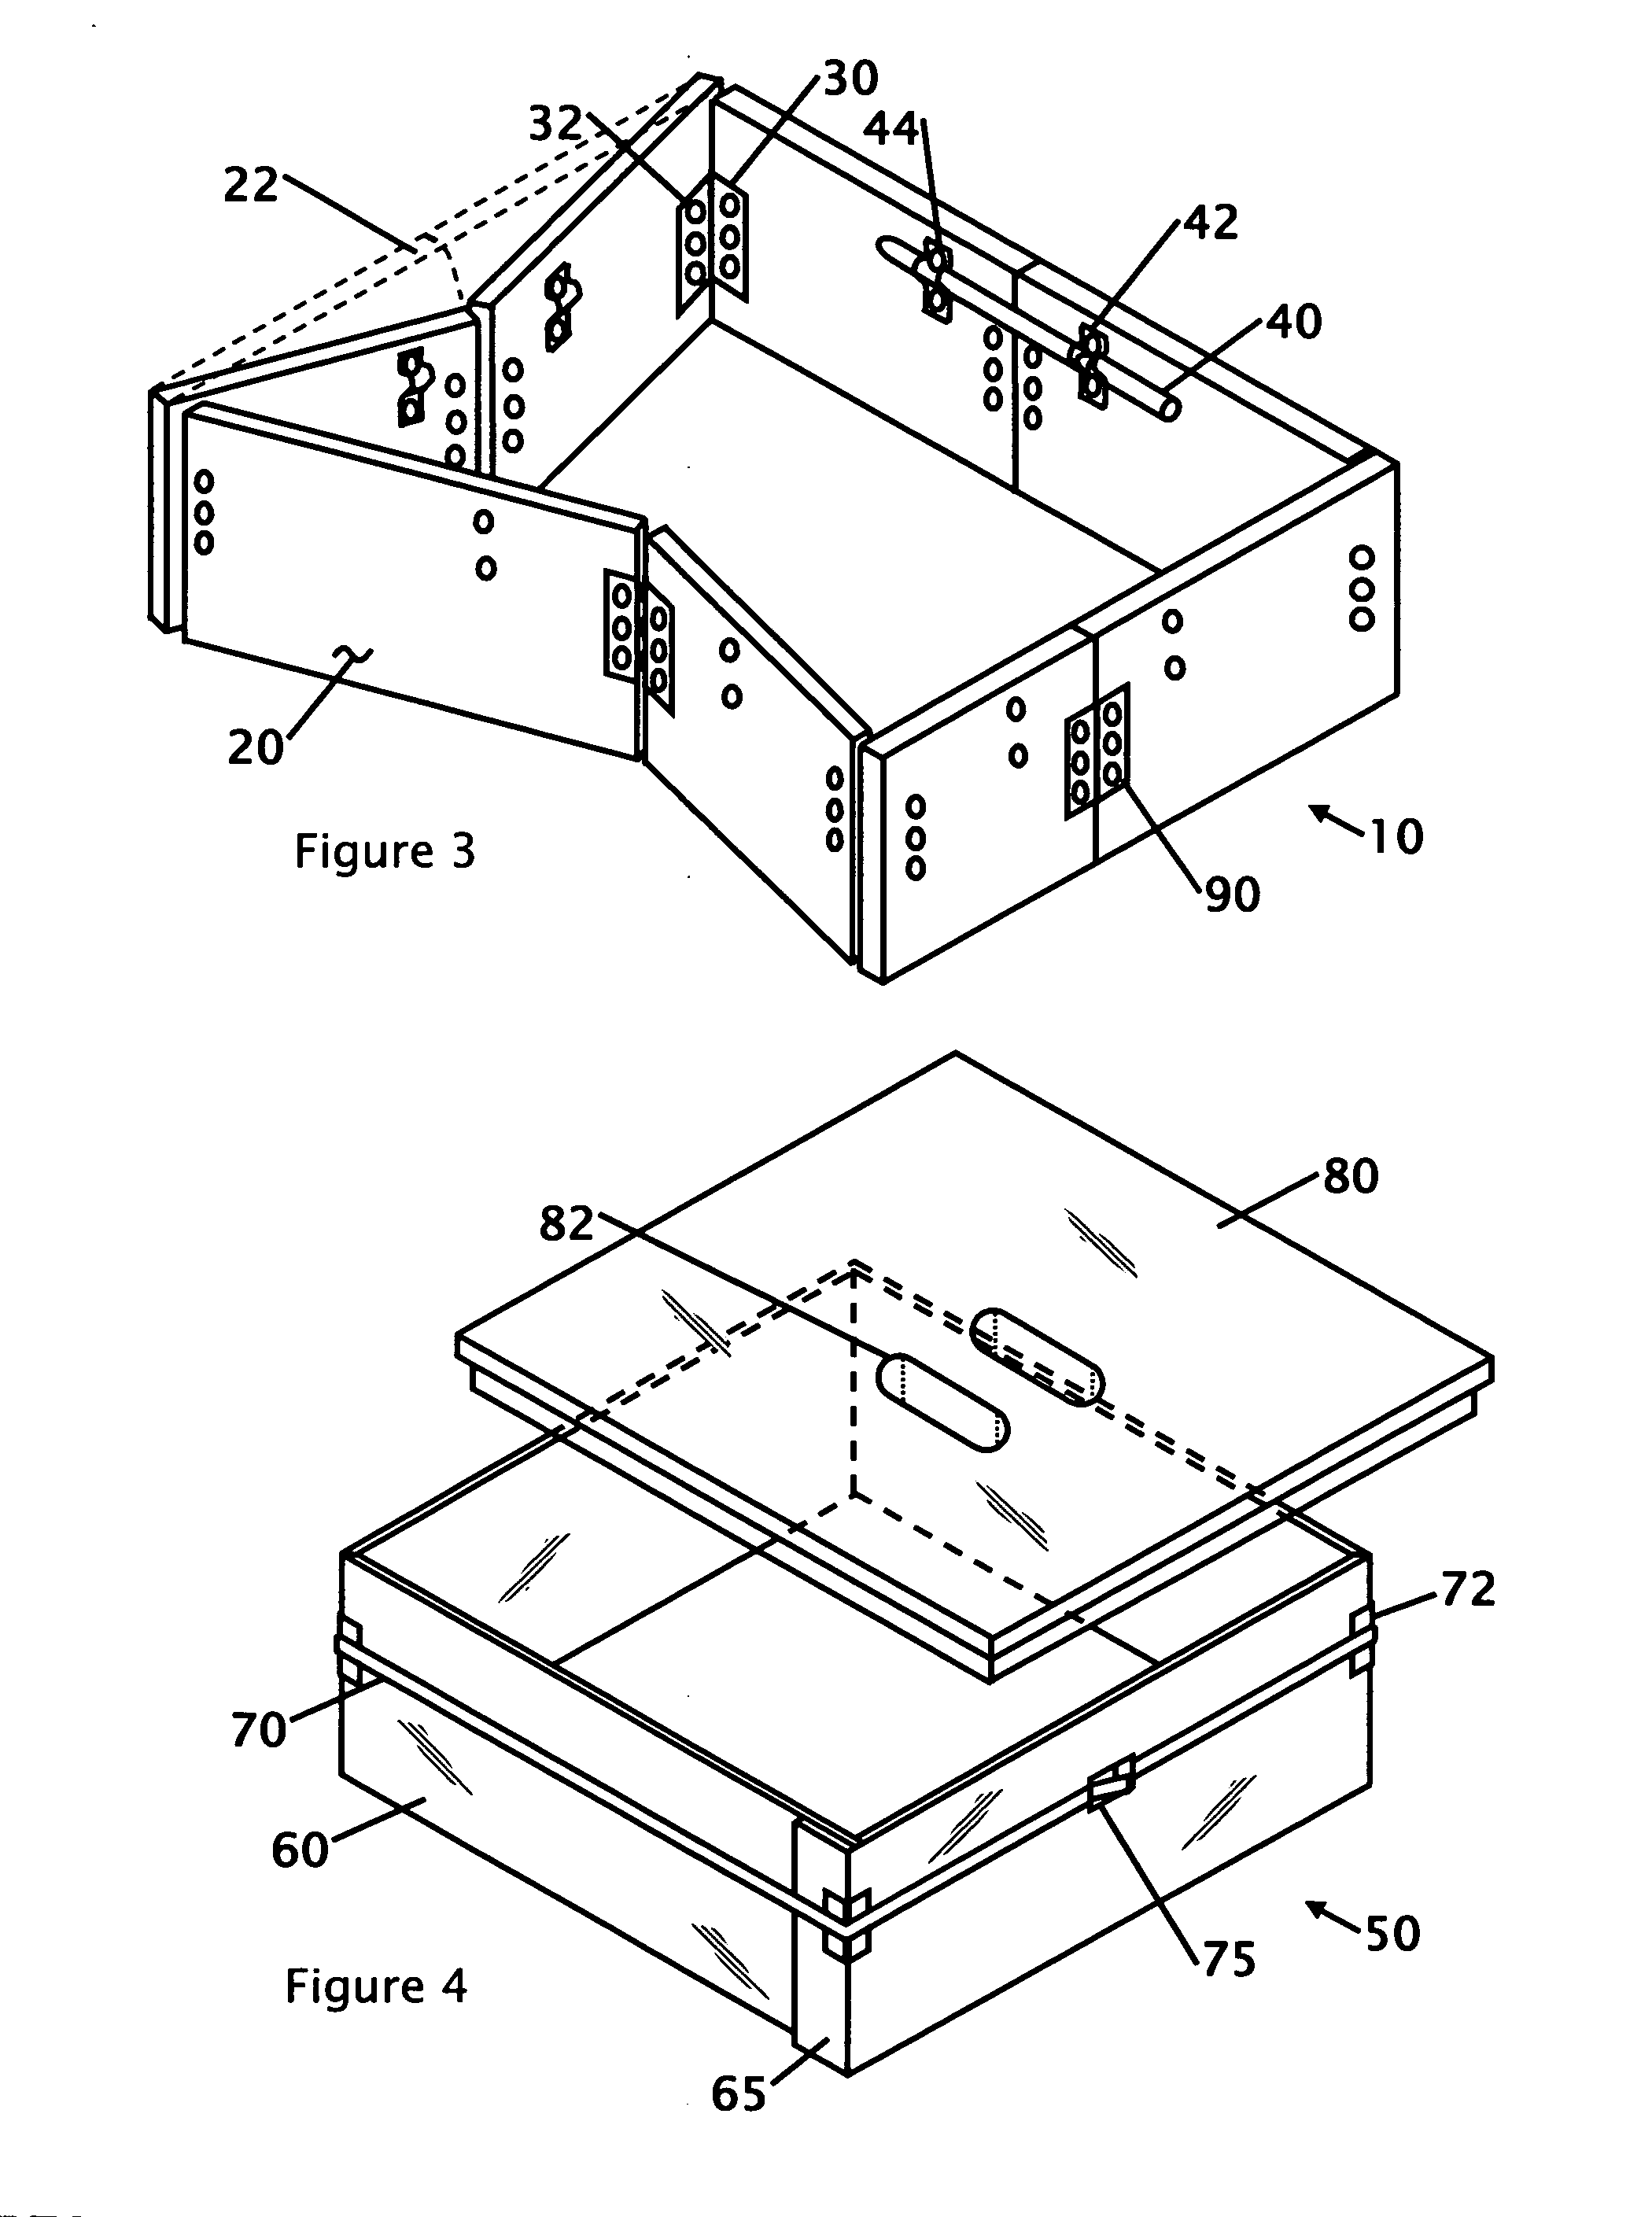 Reusable isolation joint form